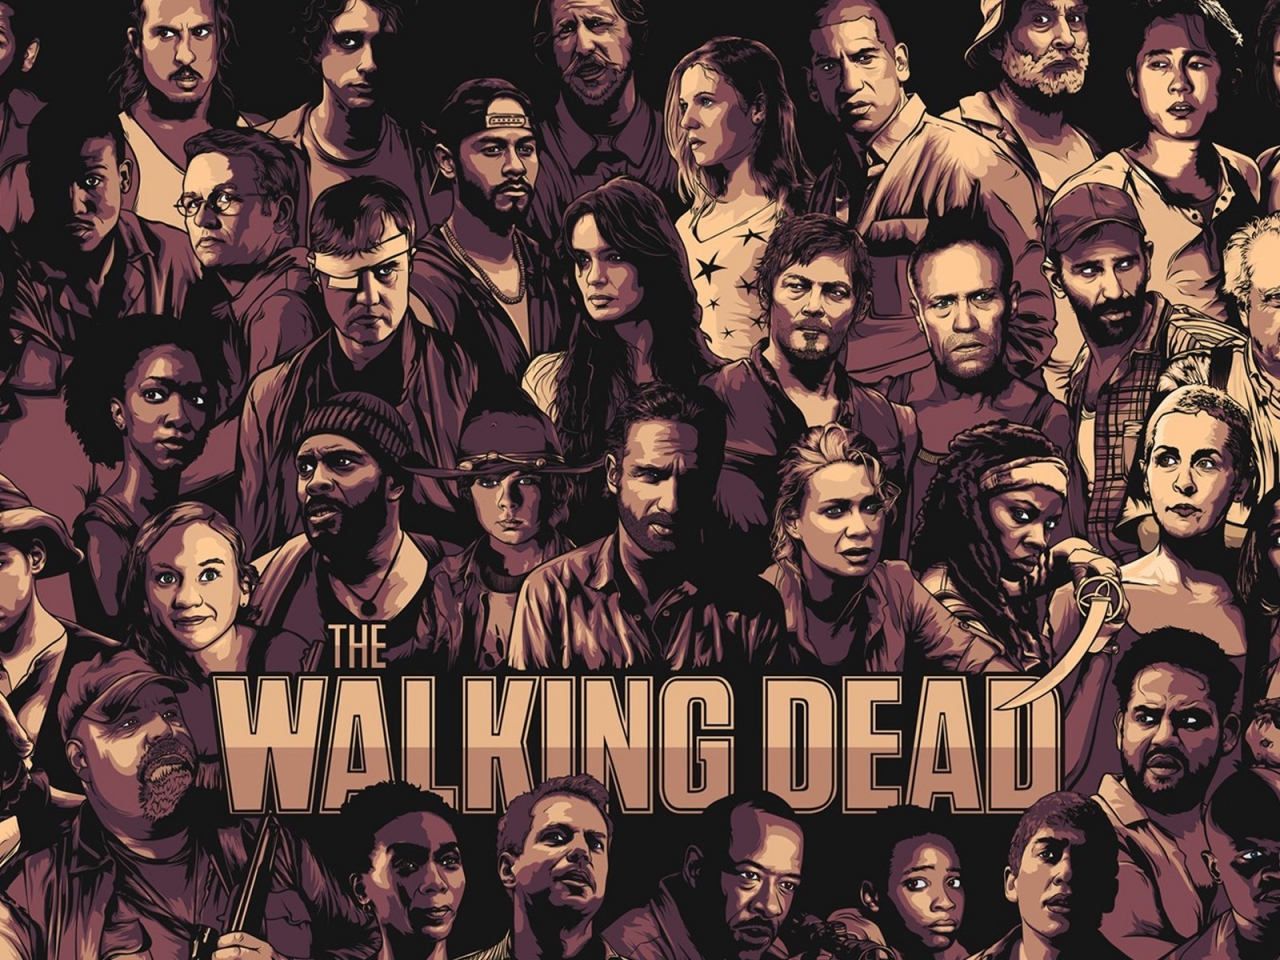 The Walking Dead Cool Poster for 1280 x 960 resolution